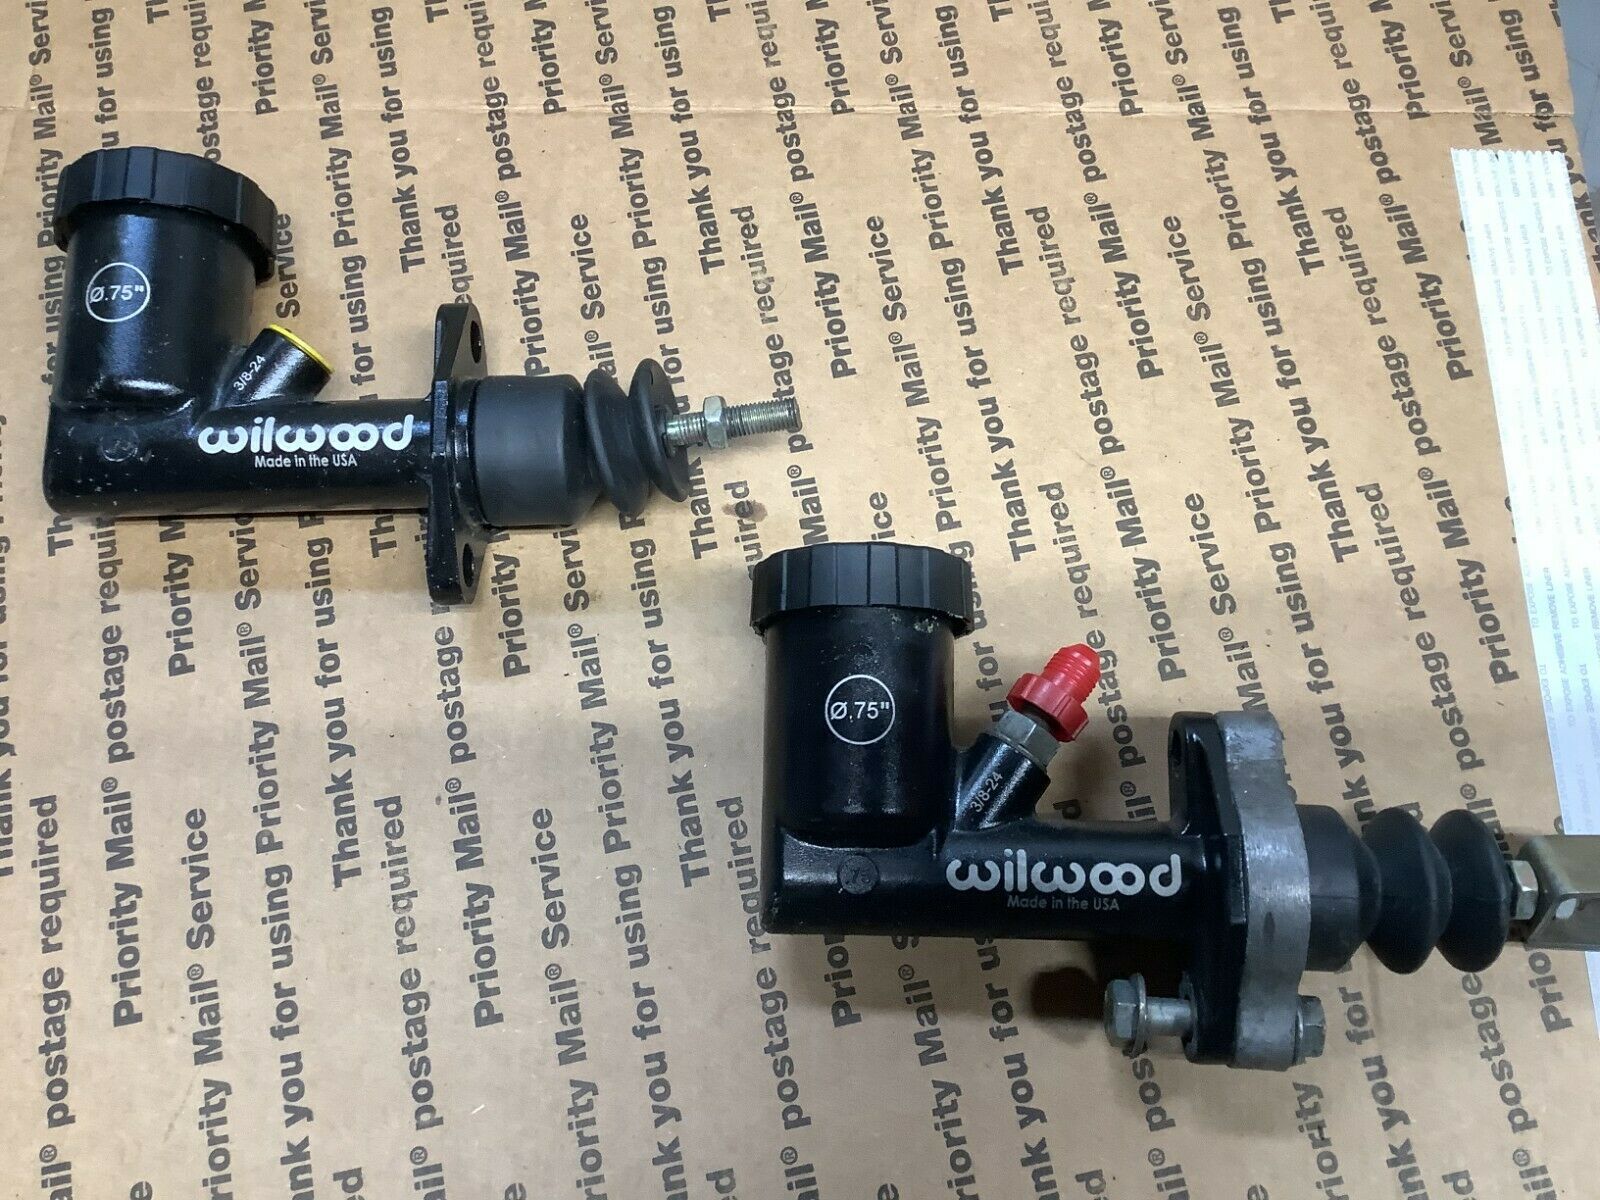 Wilwood Gs Compact Master Cylinders Part#260-15090 2 Used Sold As 1 Item